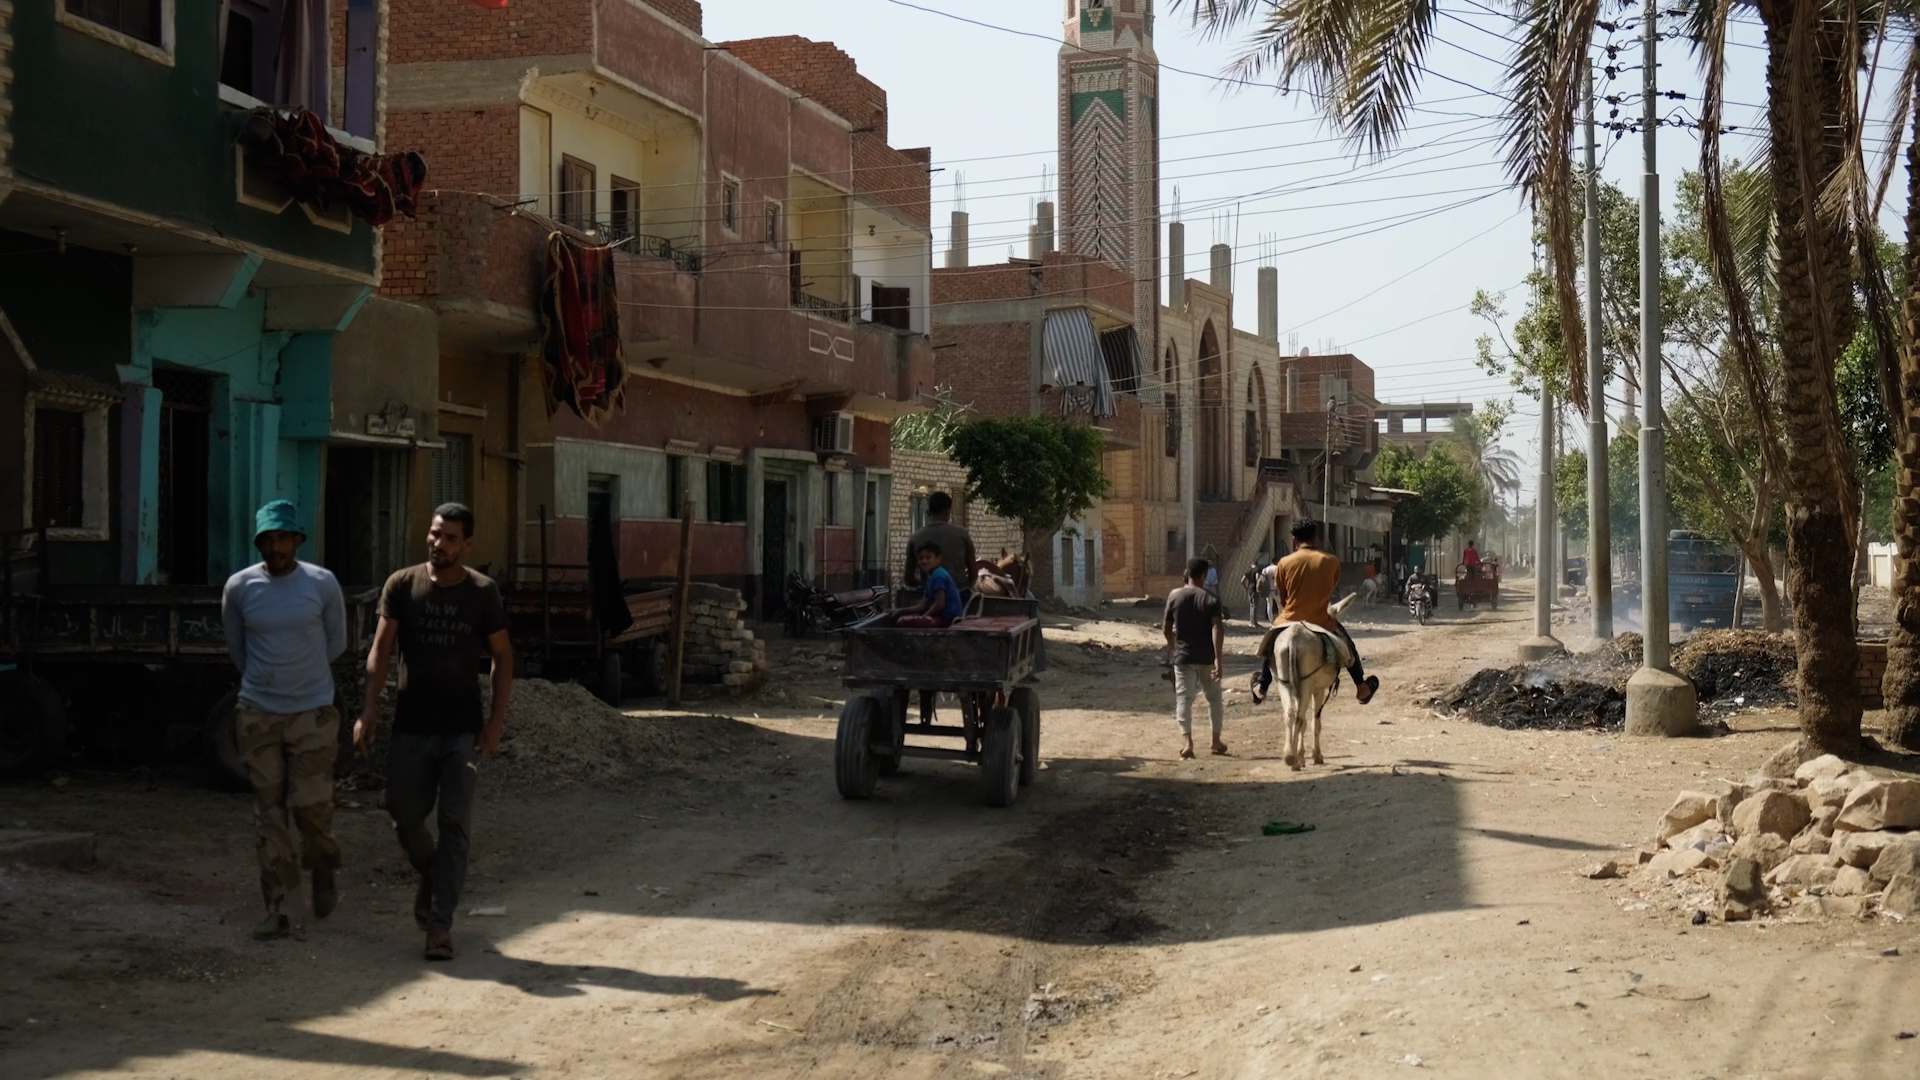 Mourning and worrying about the future in rural Egypt | Poverty and Development #Mourning #worrying #future #rural #Egypt #Poverty #Development